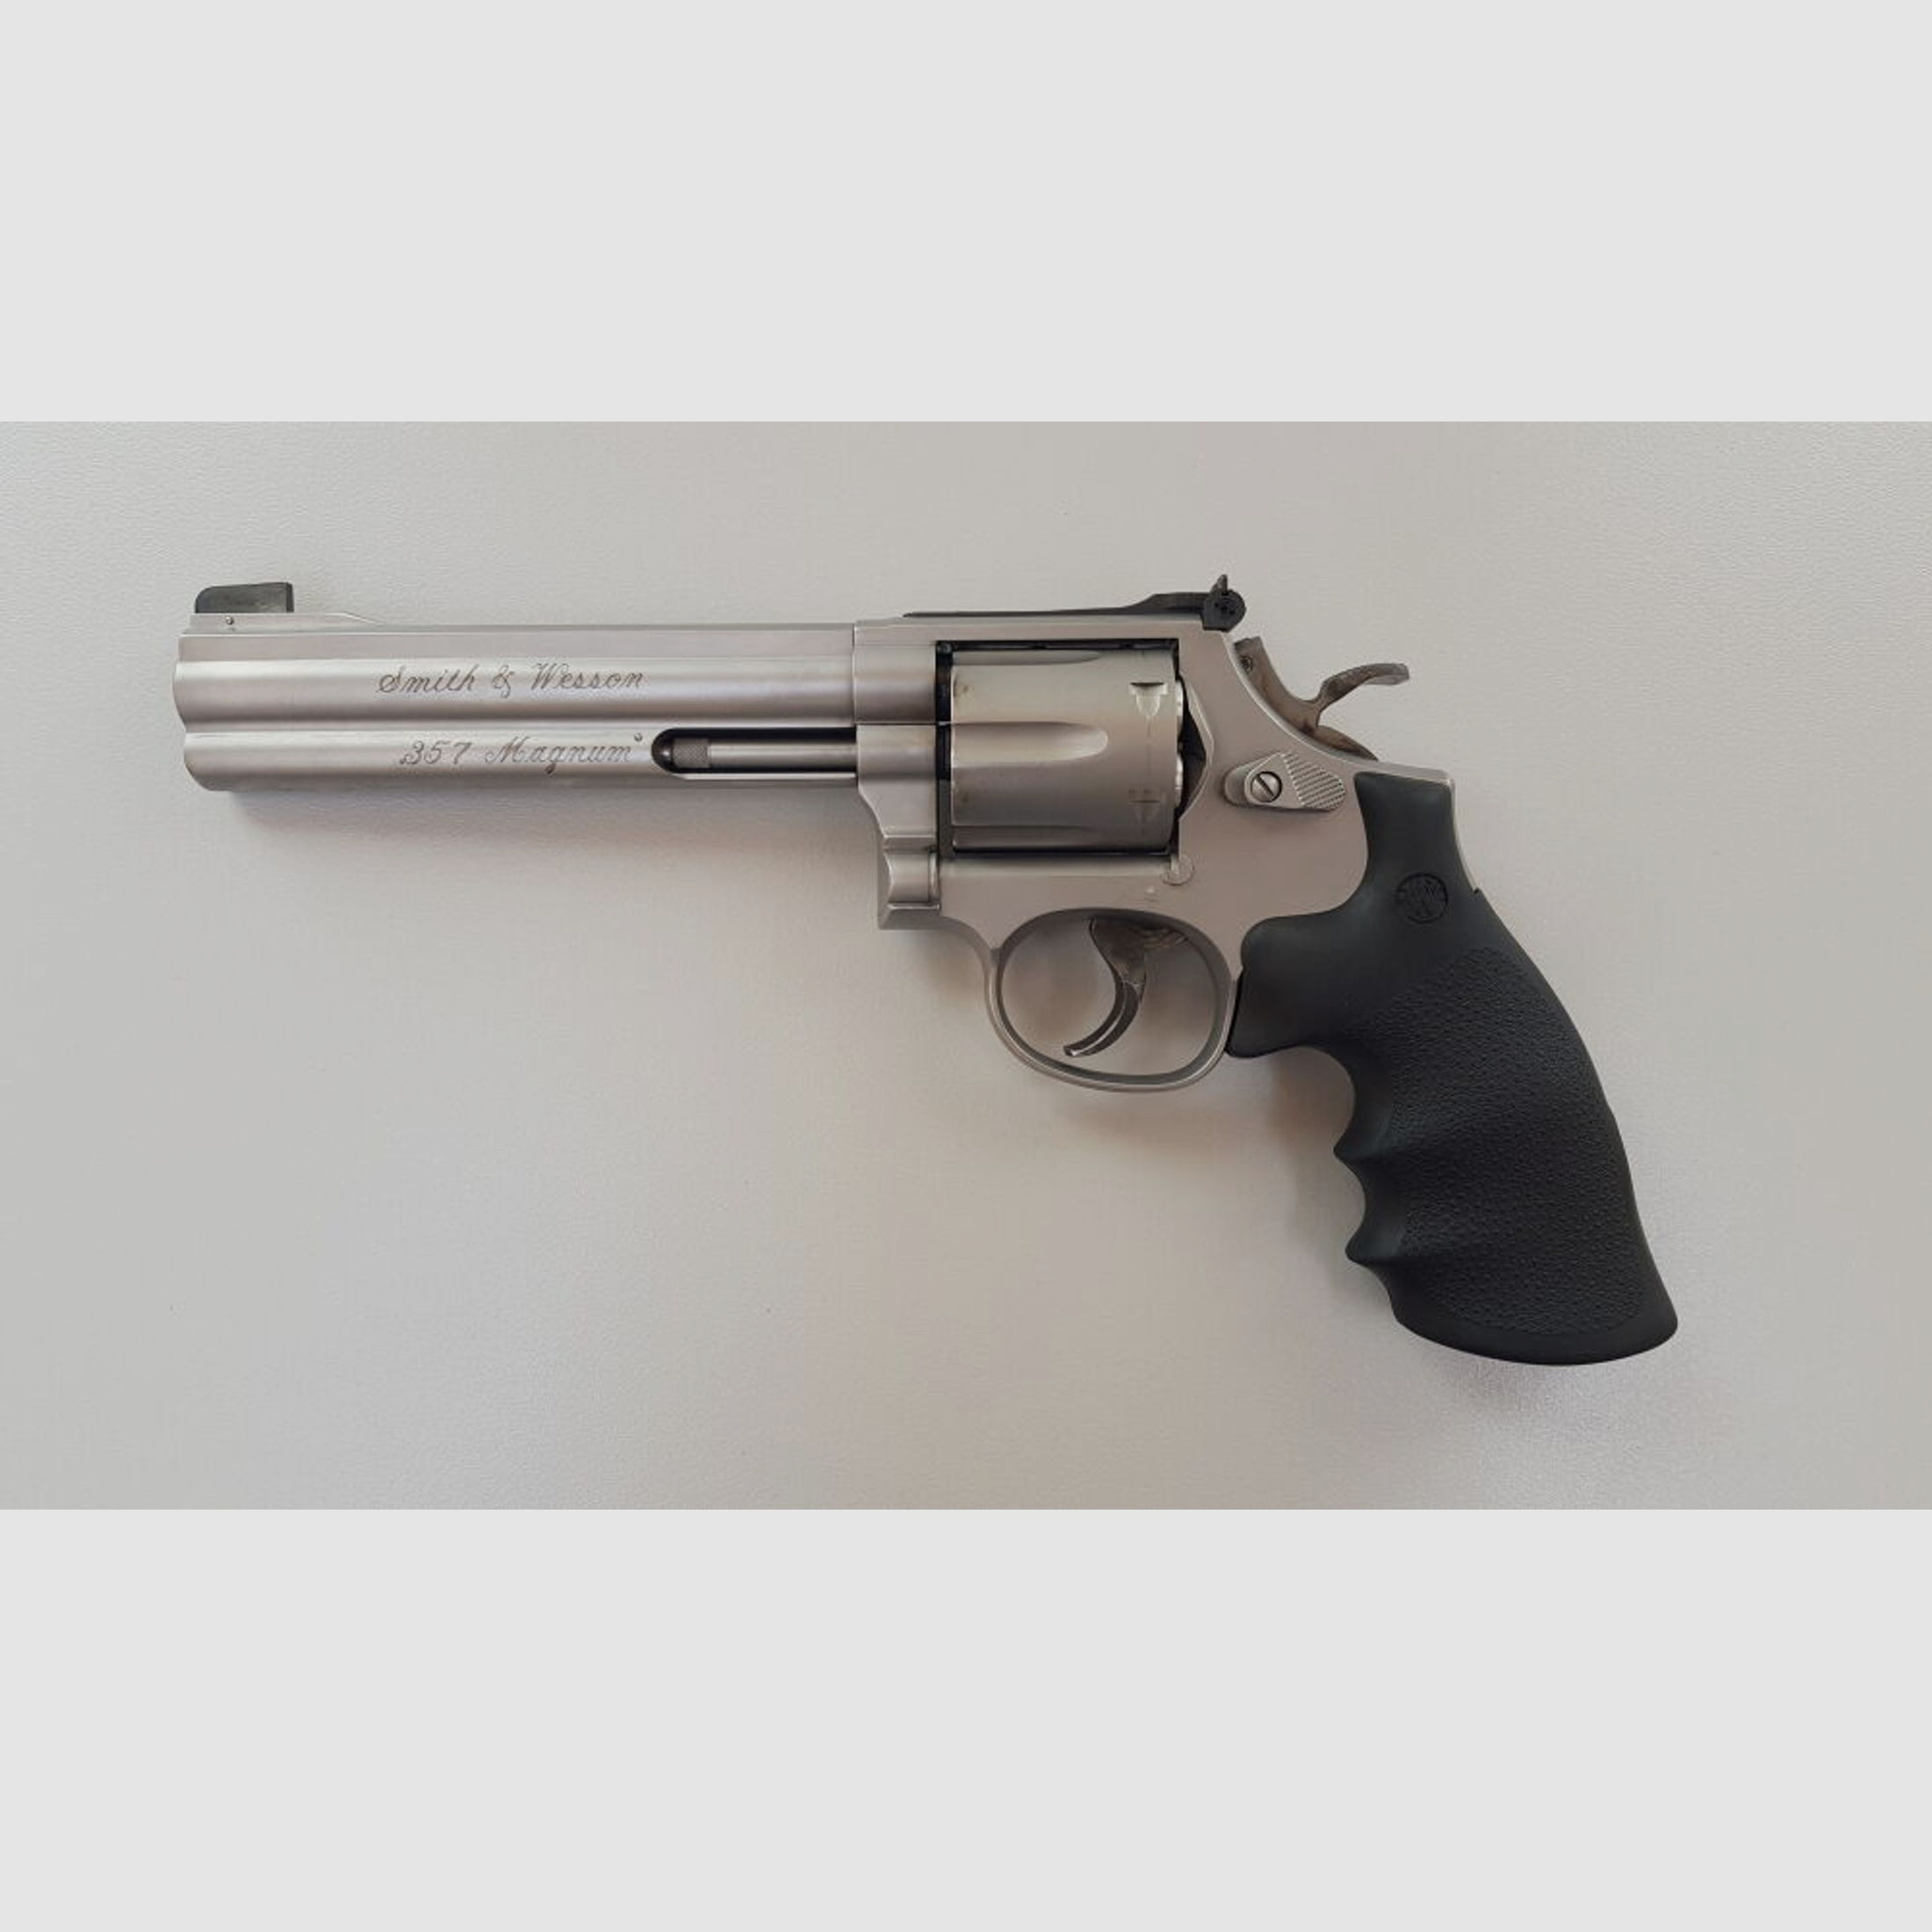 S&W Smith & Wesson	 S&W Revolver Mod. 686-4 .357 Mag. Target Champion